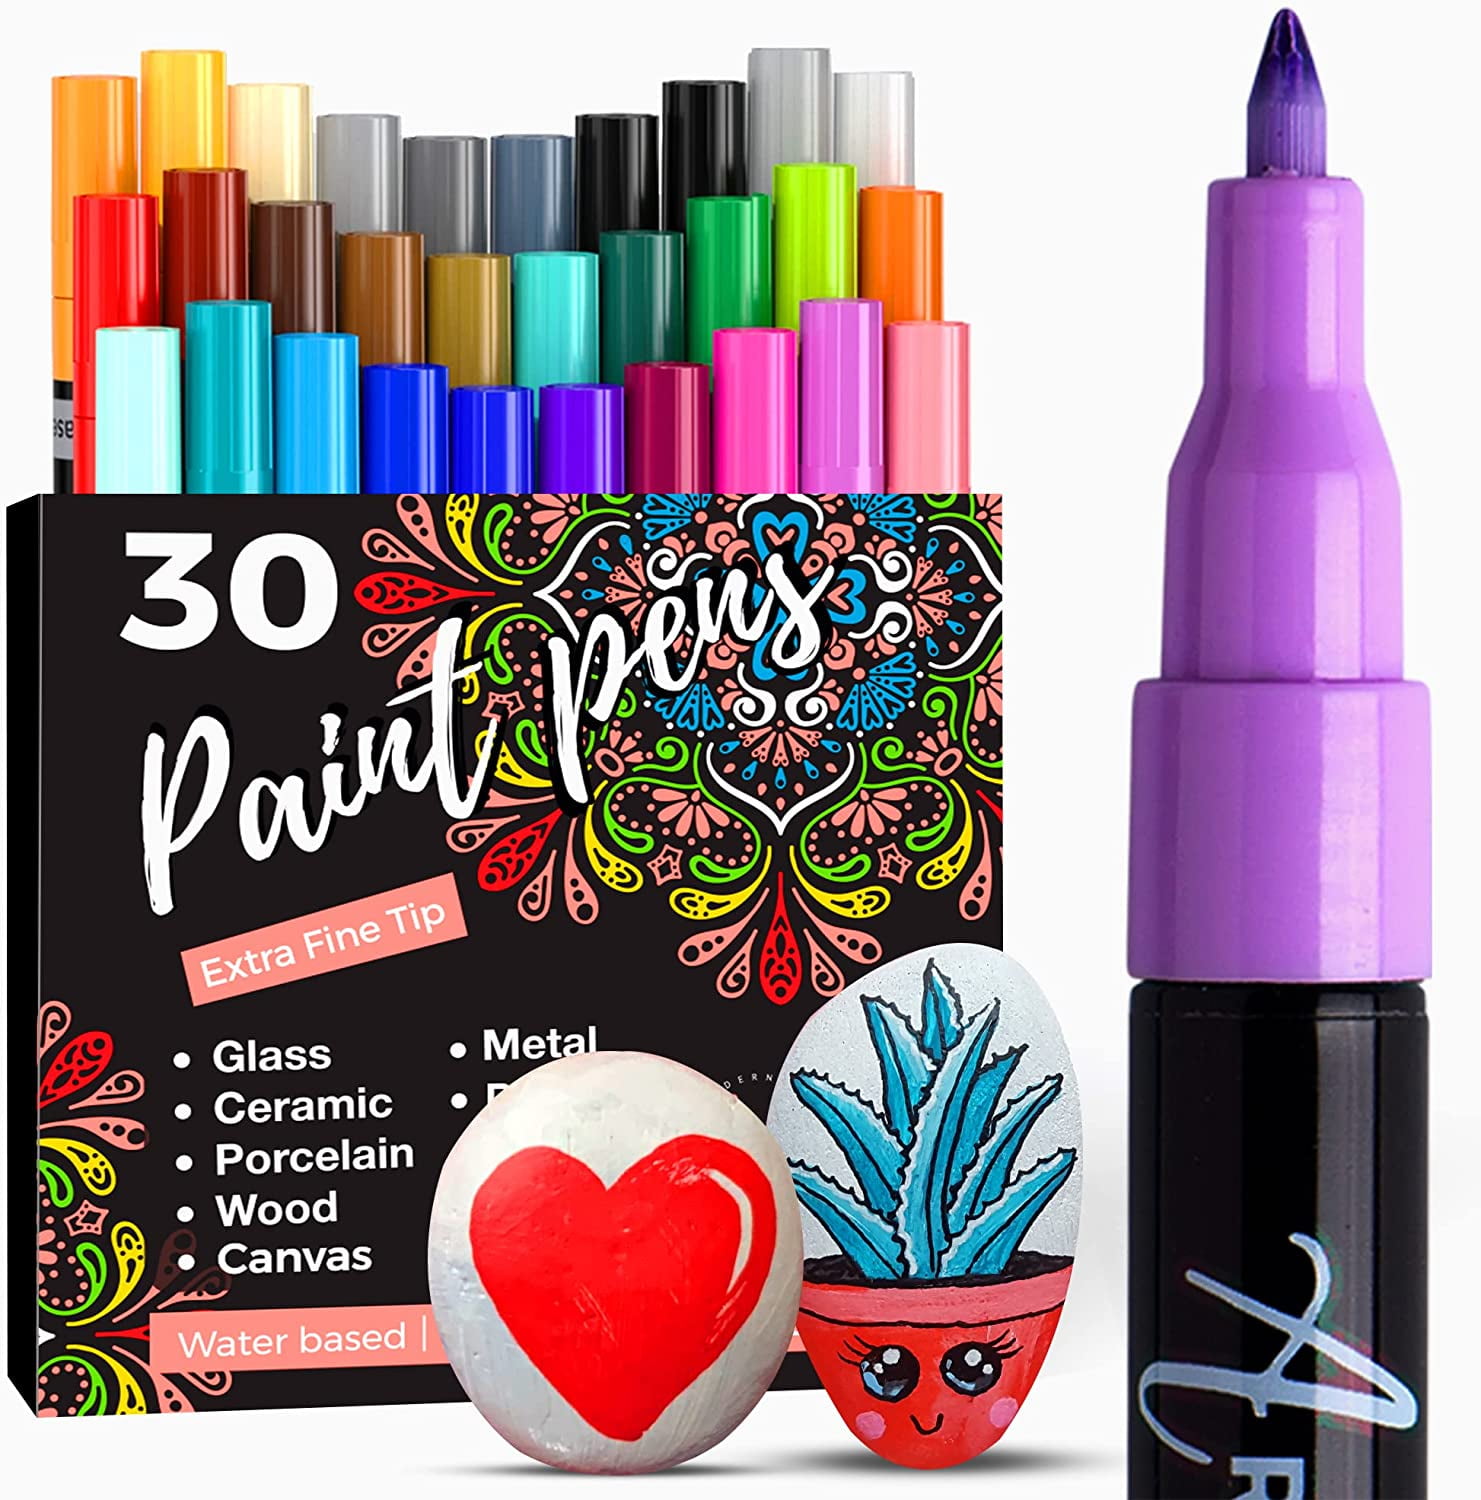  Paint Pens - 42 Paint Markers - Extra Fine Tip Paint Pens  (0.7mm) - Great for Rock Painting, Wood, Canvas, Ceramic, Fabric, Glass -  40 Colors + Extra Black & White